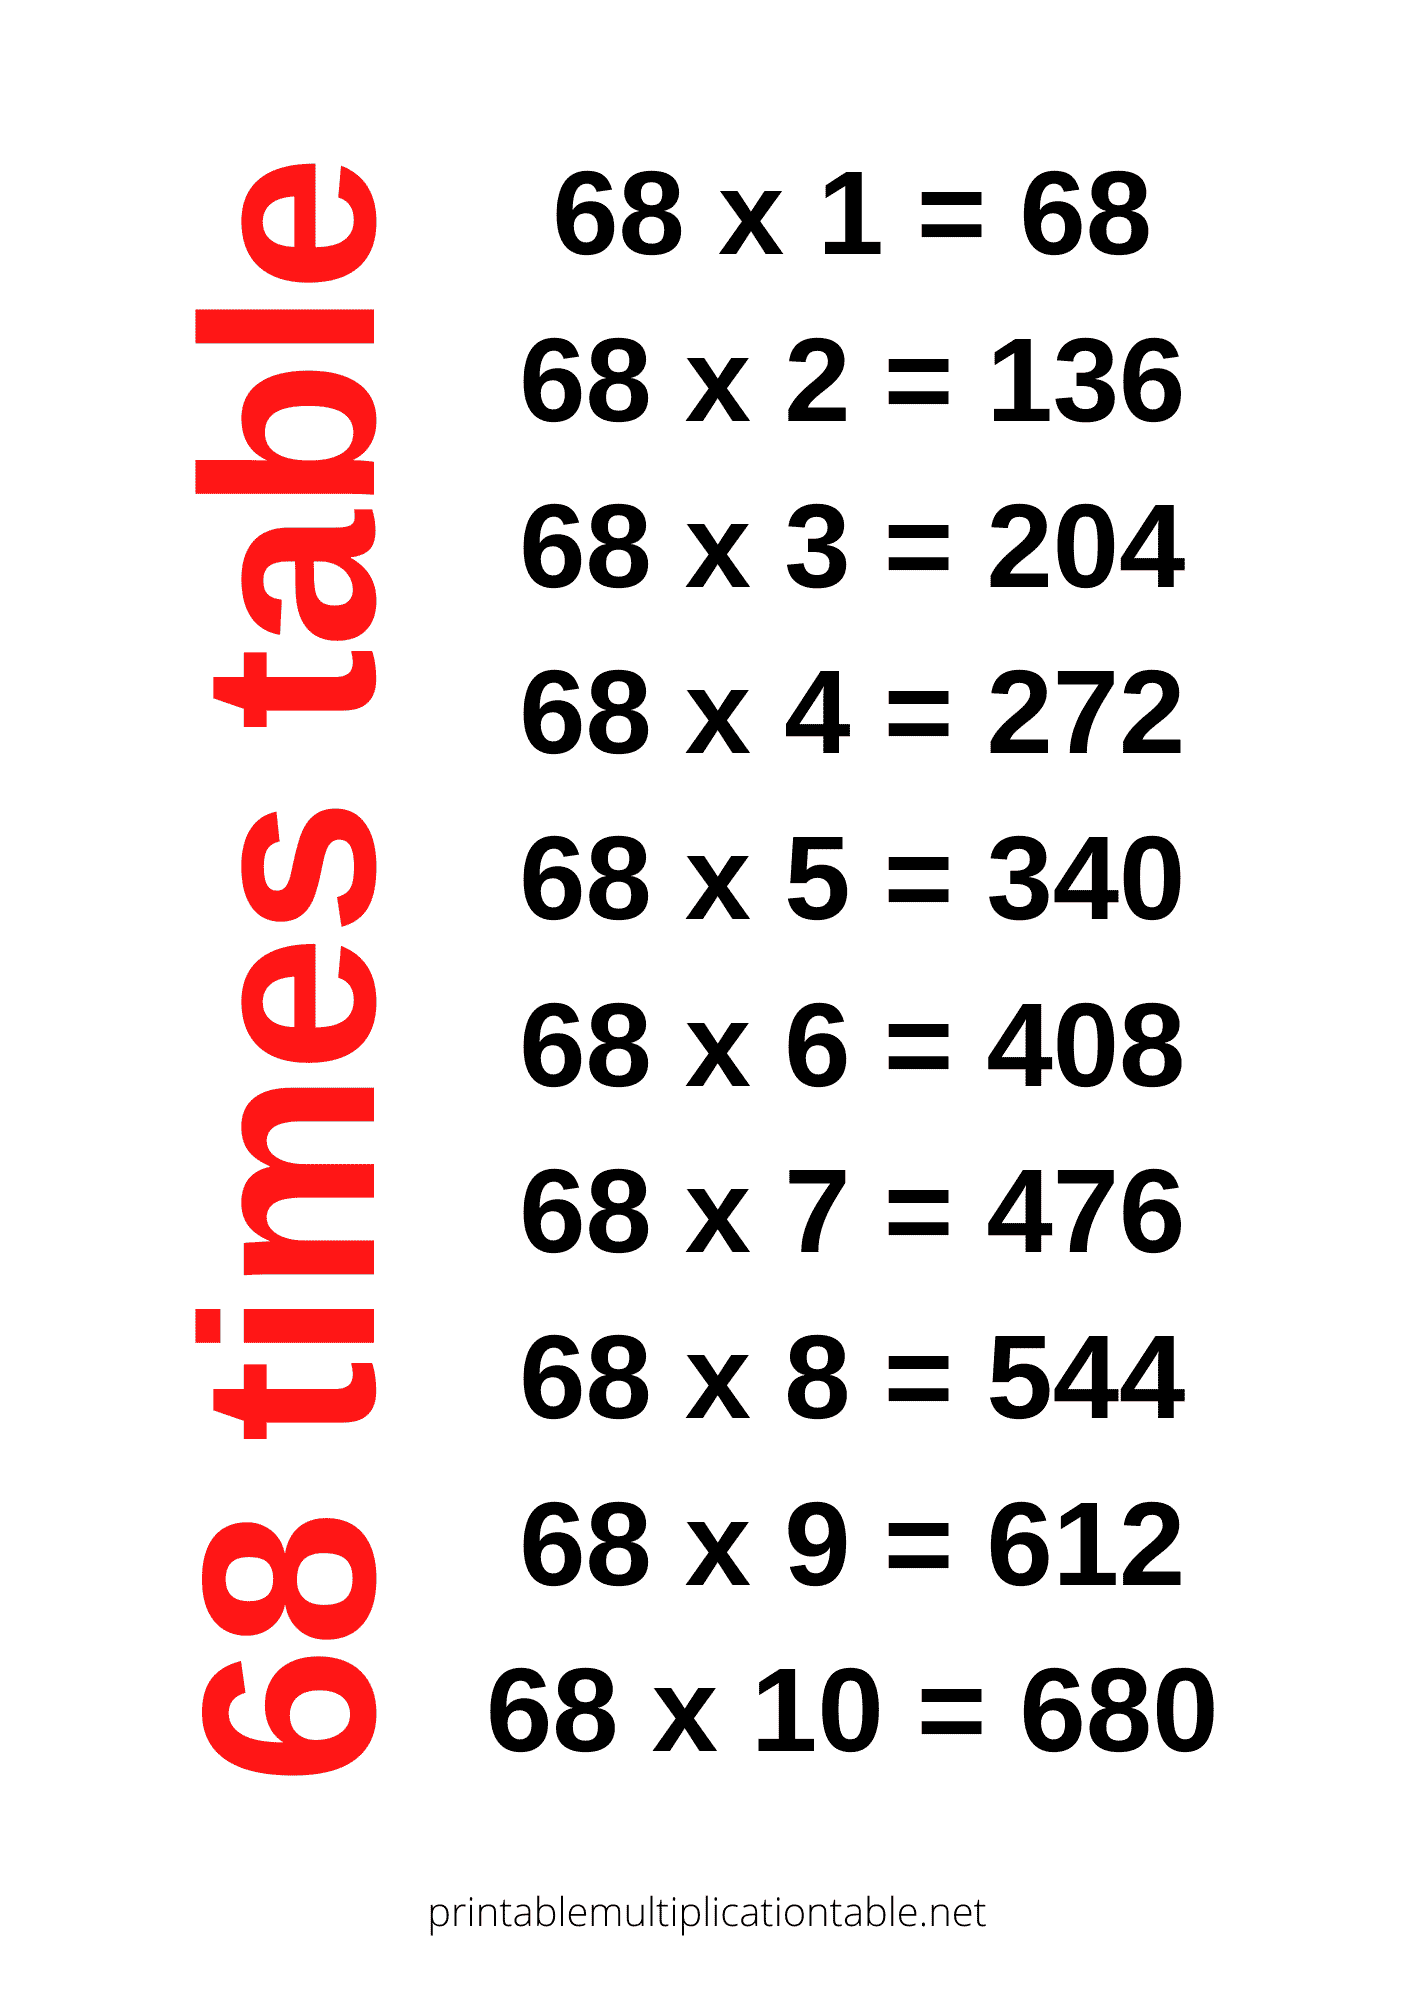 68 times table chart